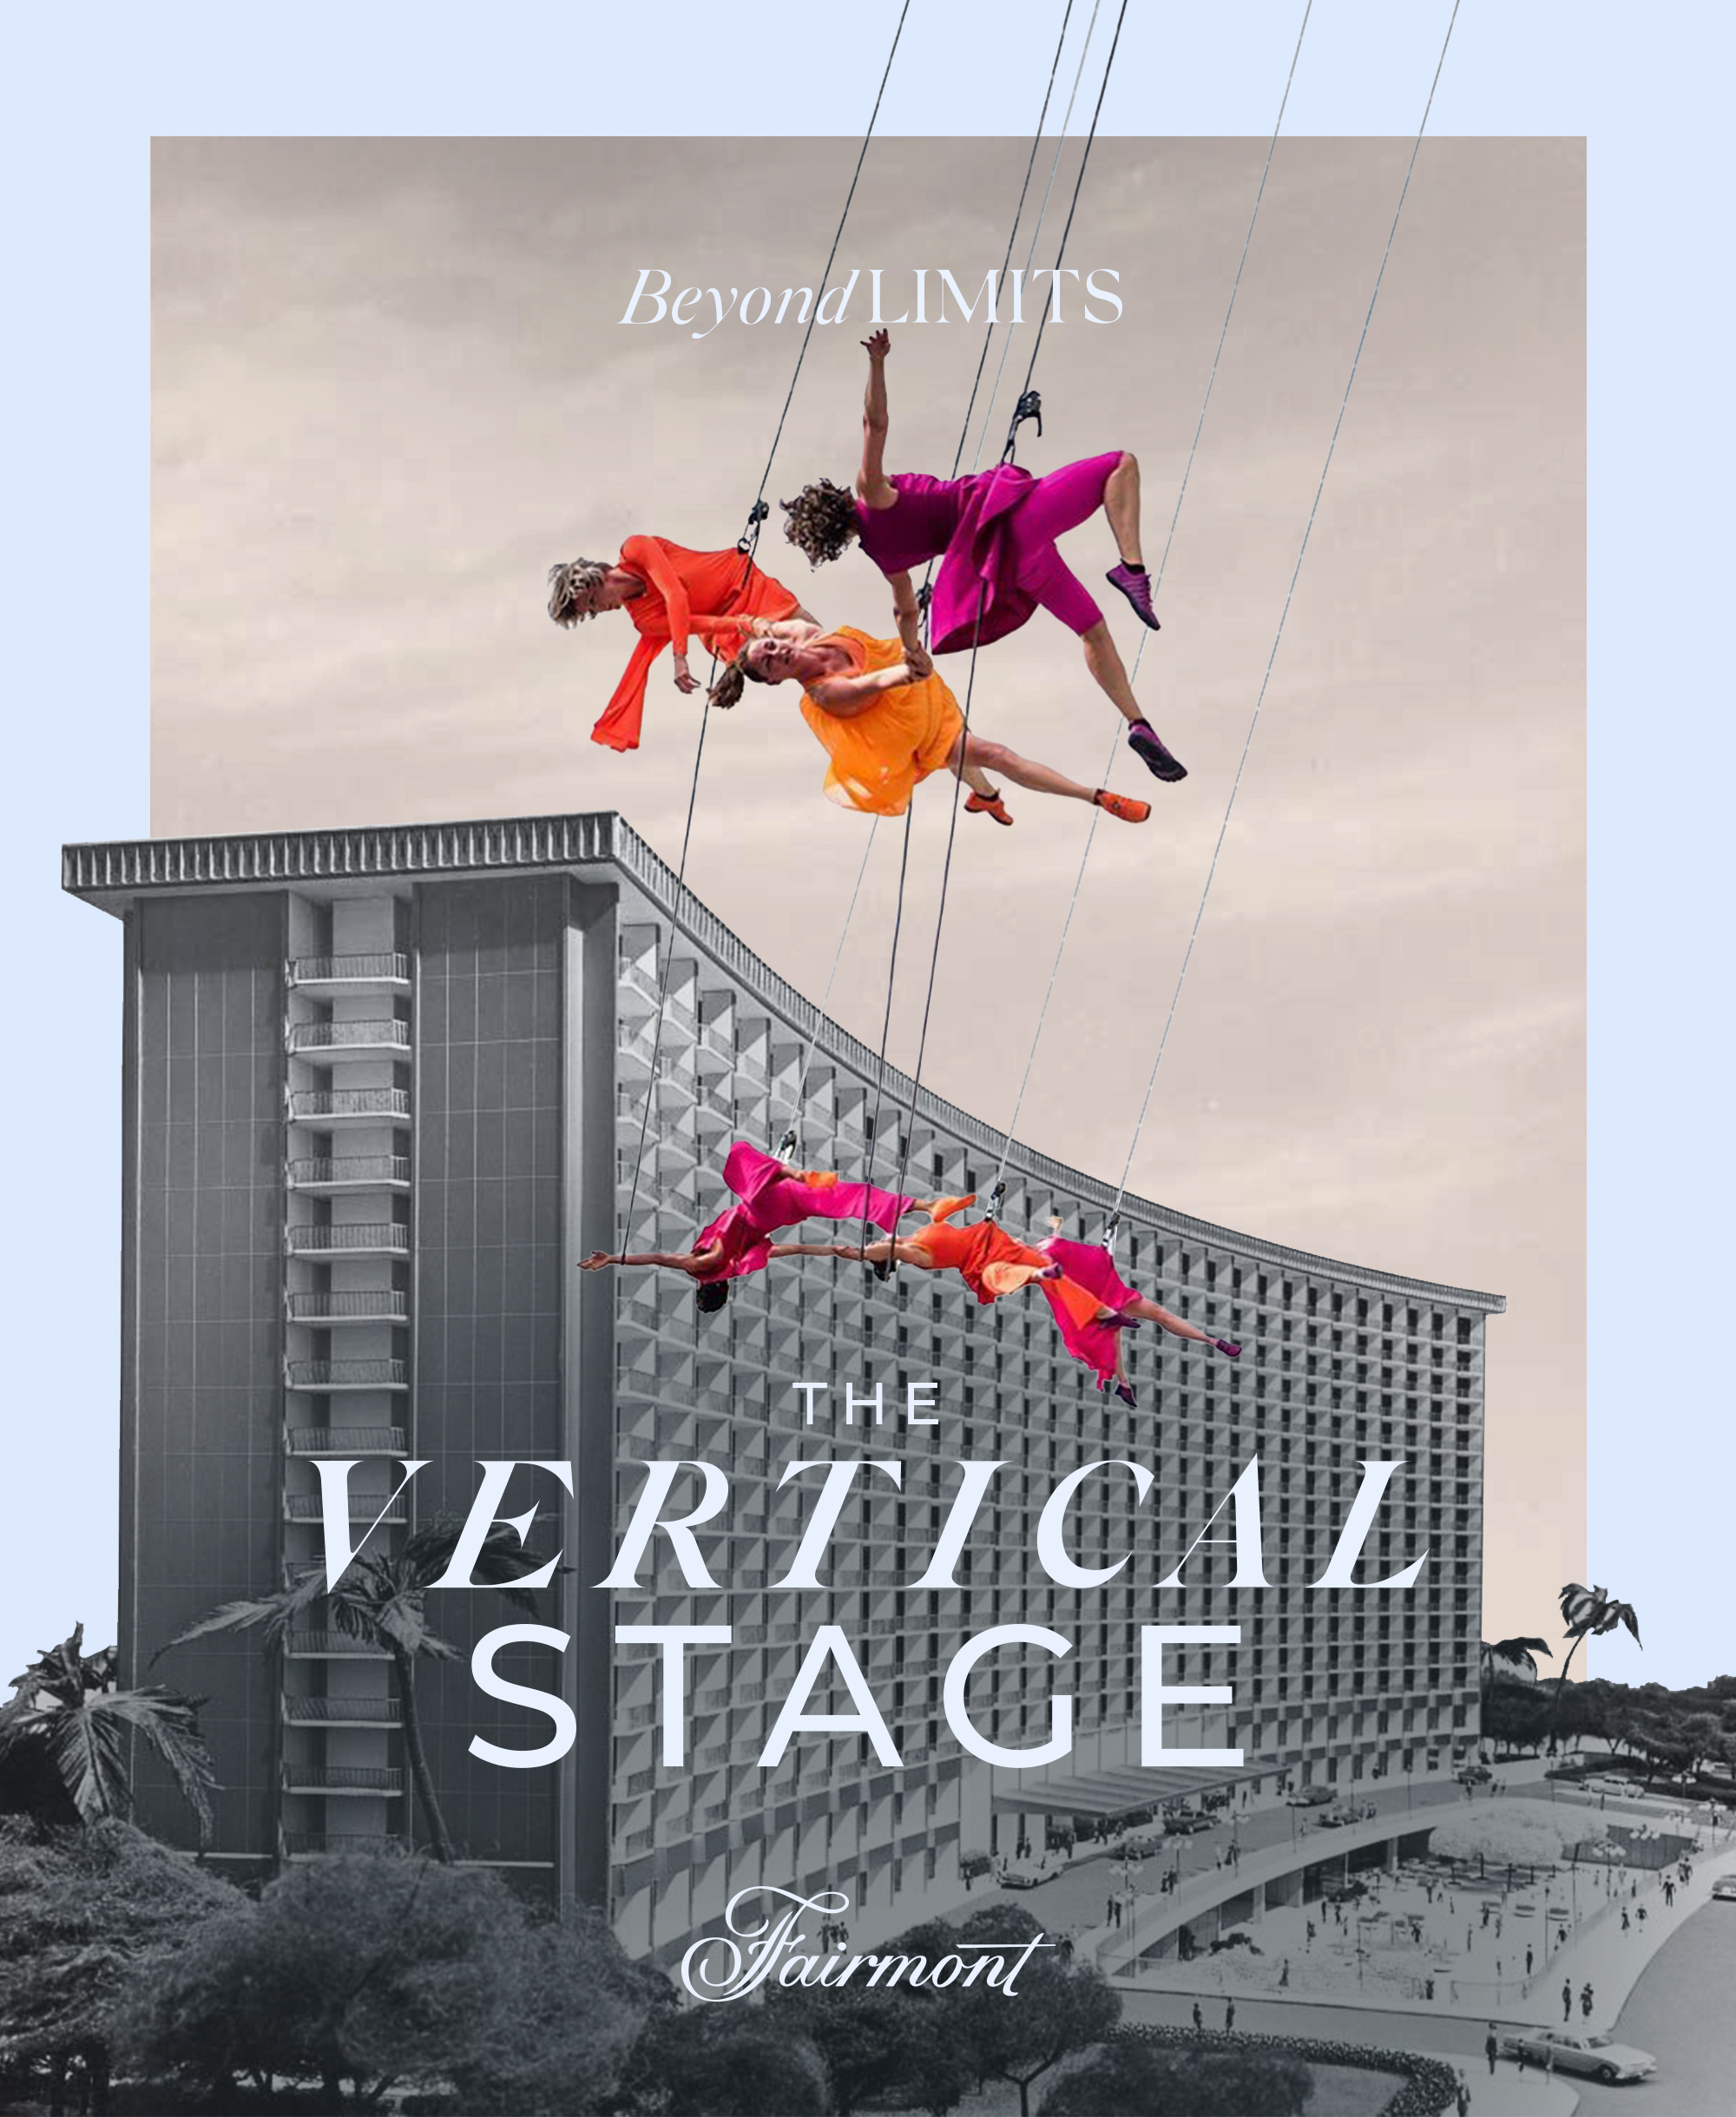 Fairmont Century Plaza takes performance art to the next level with launch of ‘The Vertical Stage’